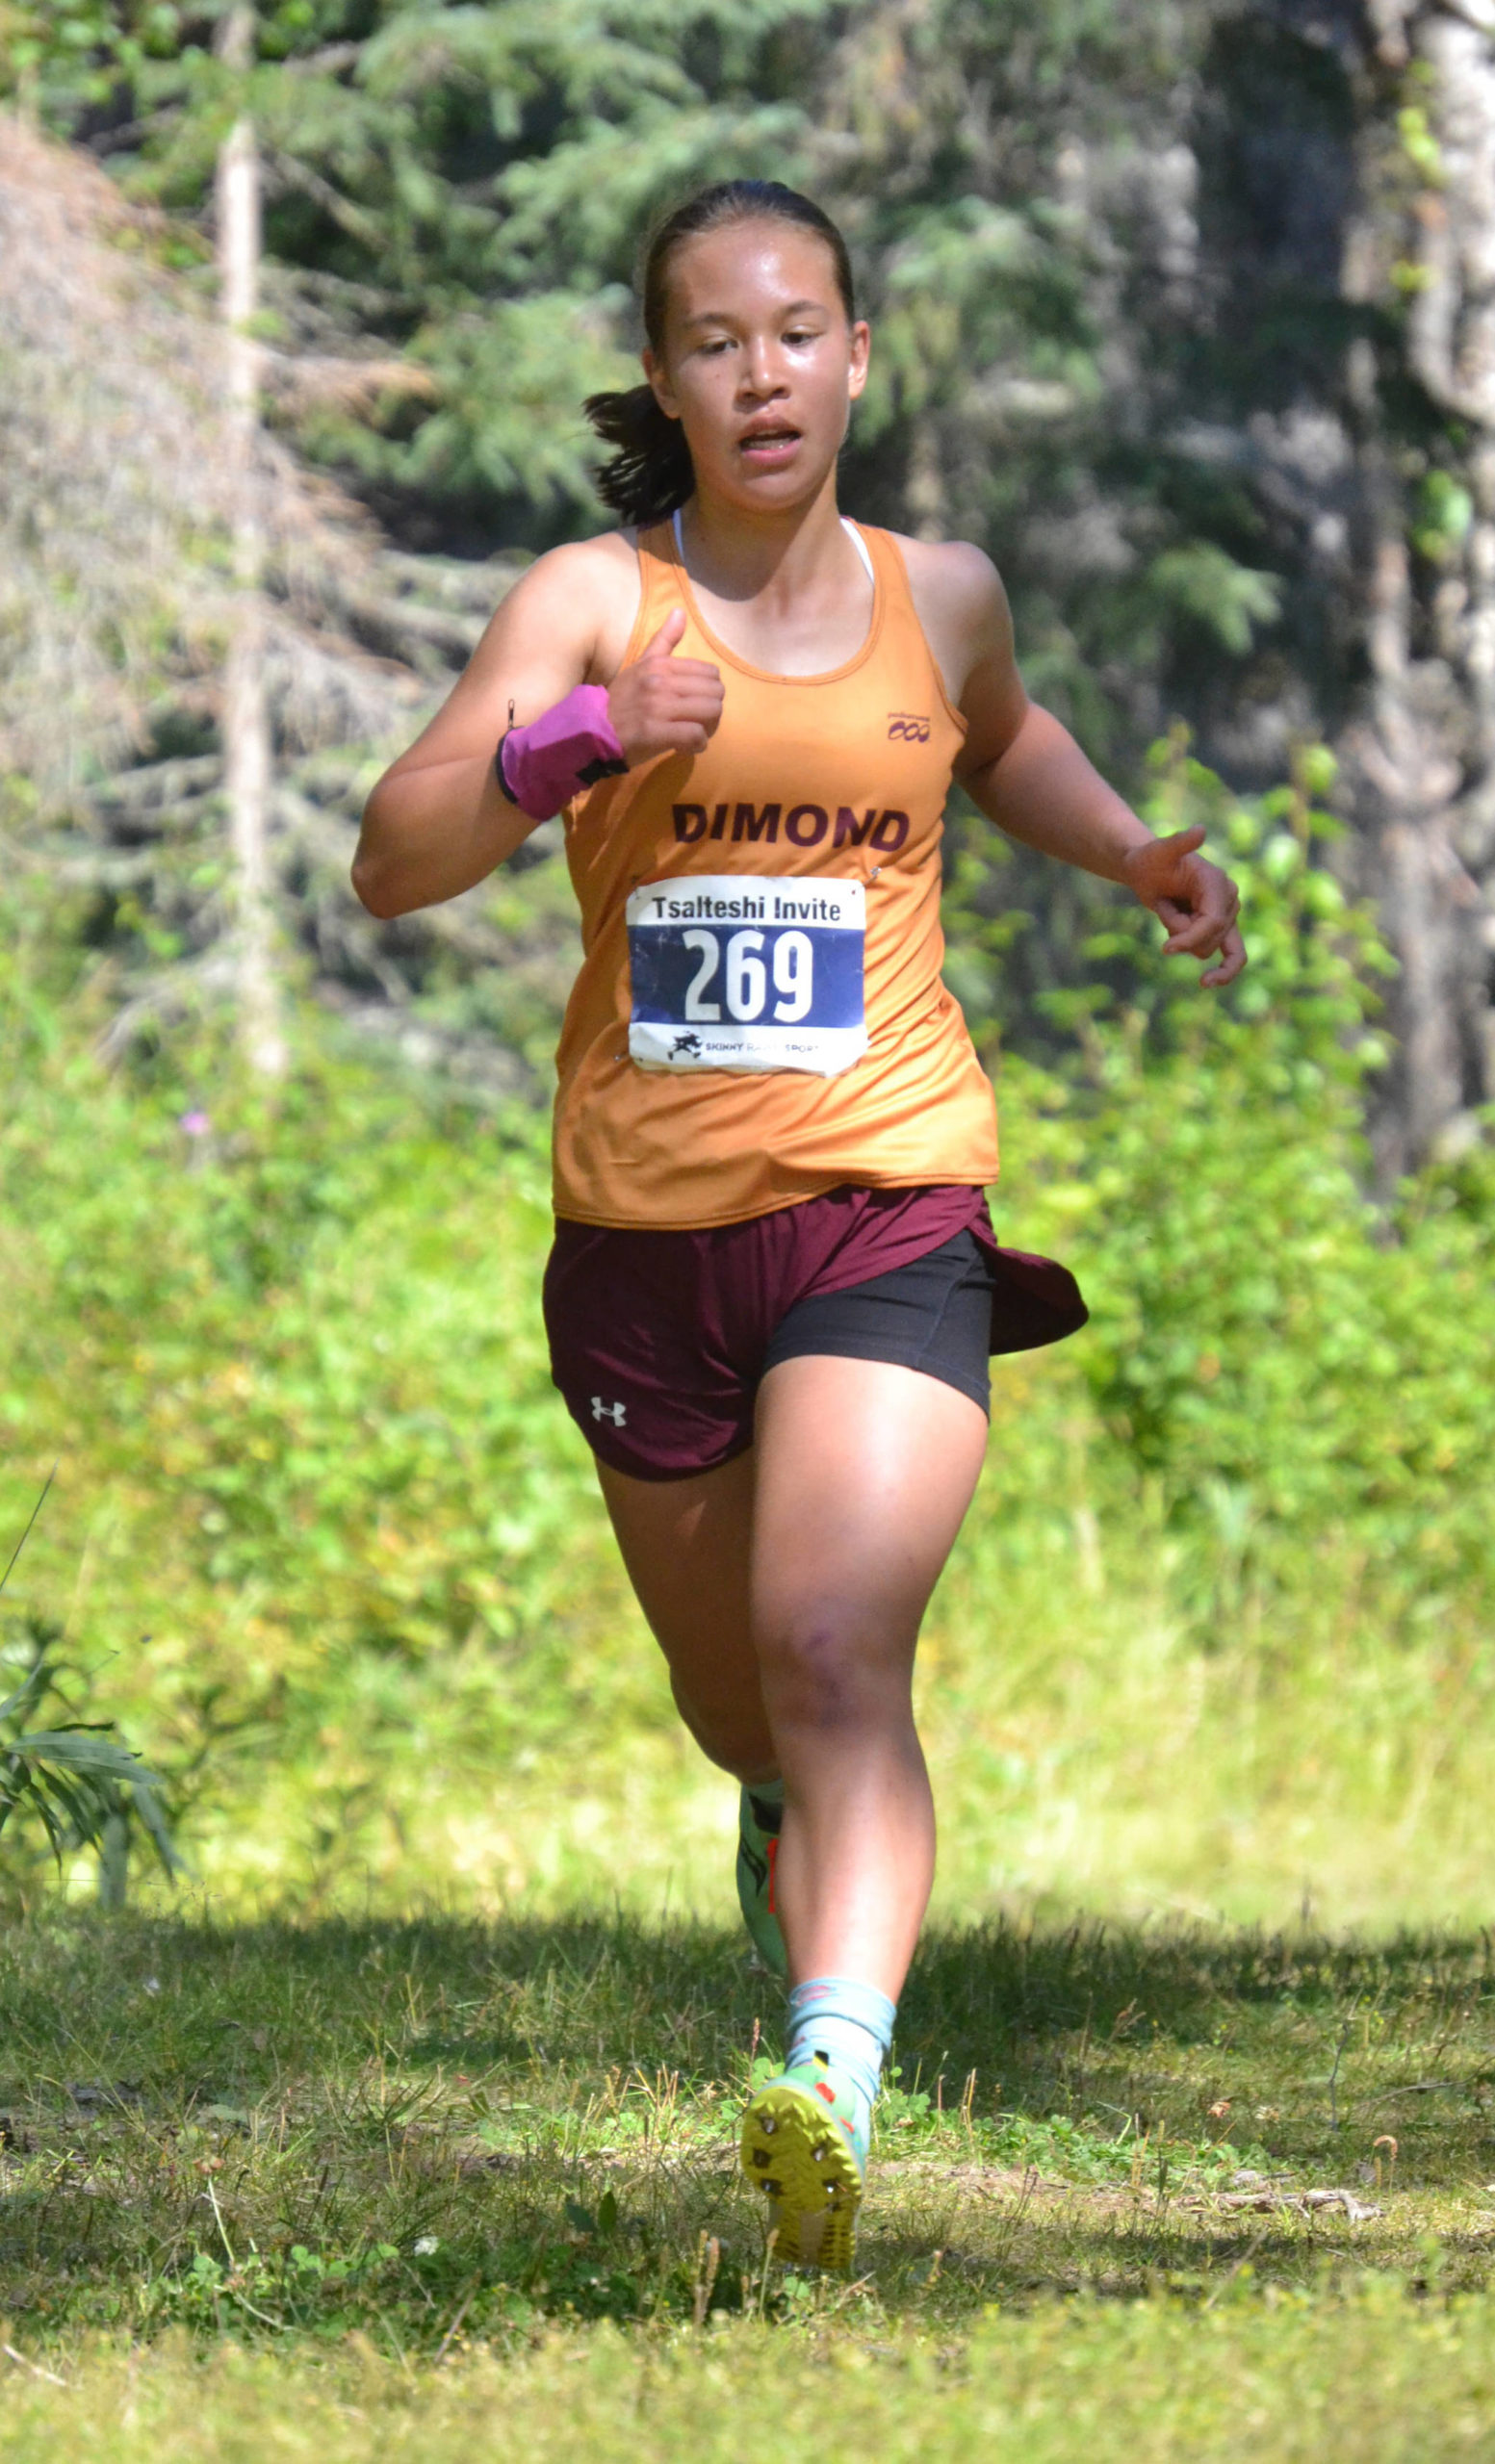 Dimond’s Emily Erickson runs to victory in the girls varsity race at the Ted McKenney XC Invitational on Saturday, Aug. 21, 2021, at Tsalteshi Trails just outside of Soldotna, Alaska. (Photo by Jeff Helminiak/Peninsula Clarion)